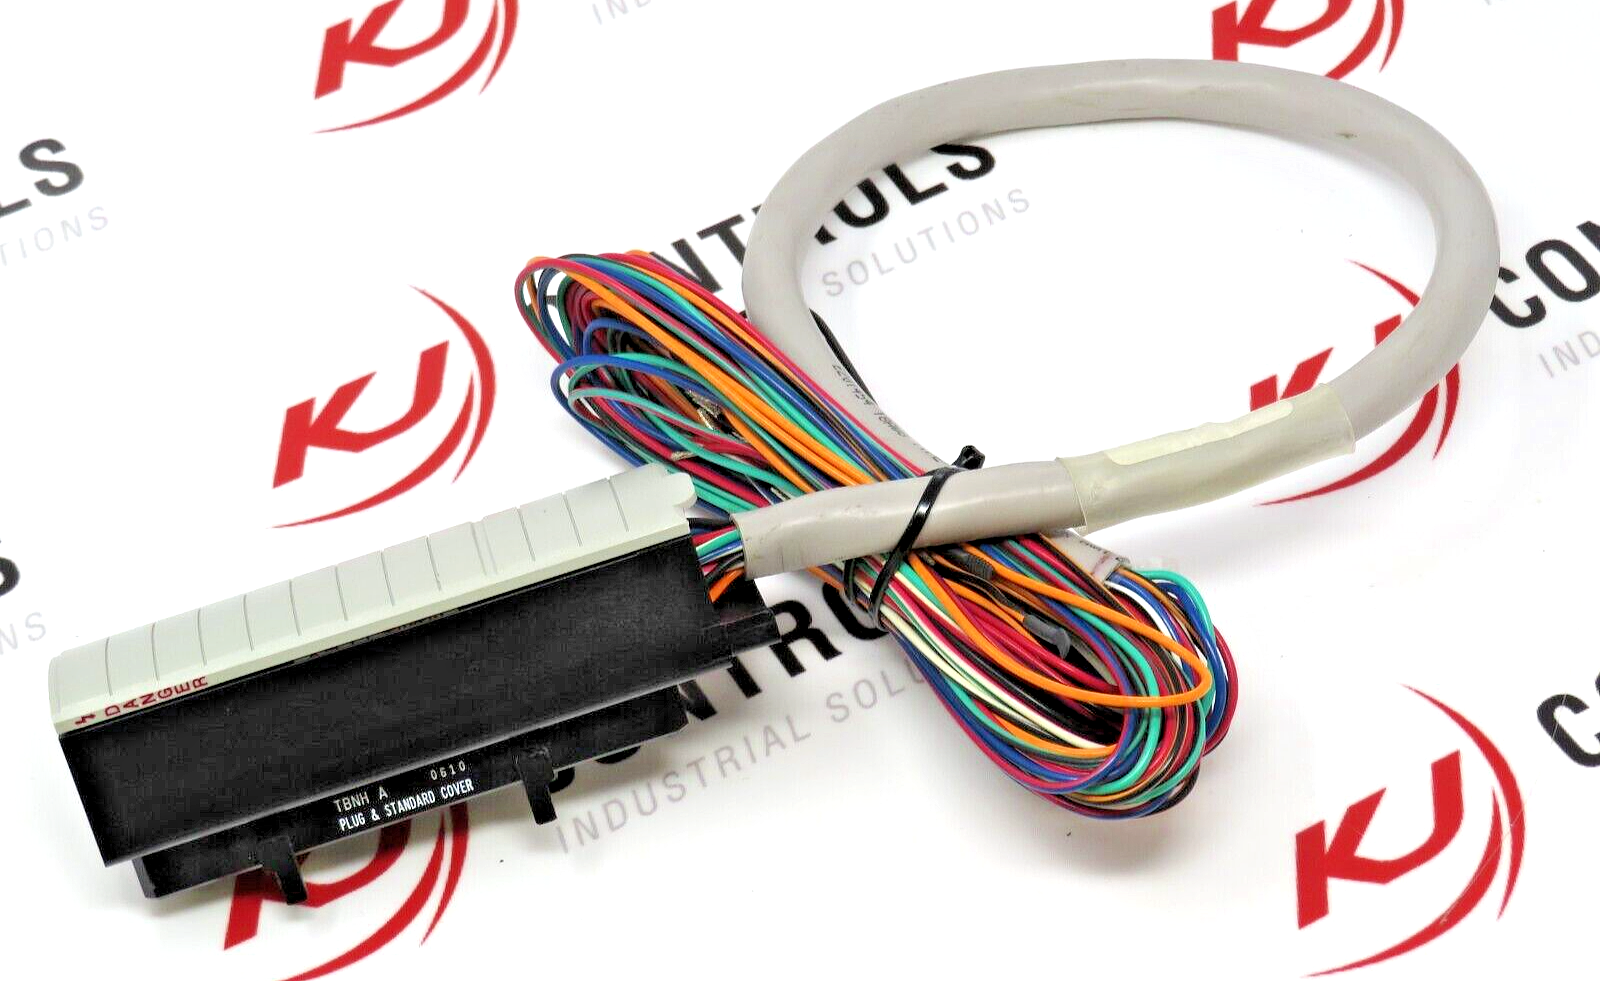 Allen-Bradley 1492-CABLE025TBNH Digital Connection Cable With Partial Insulation